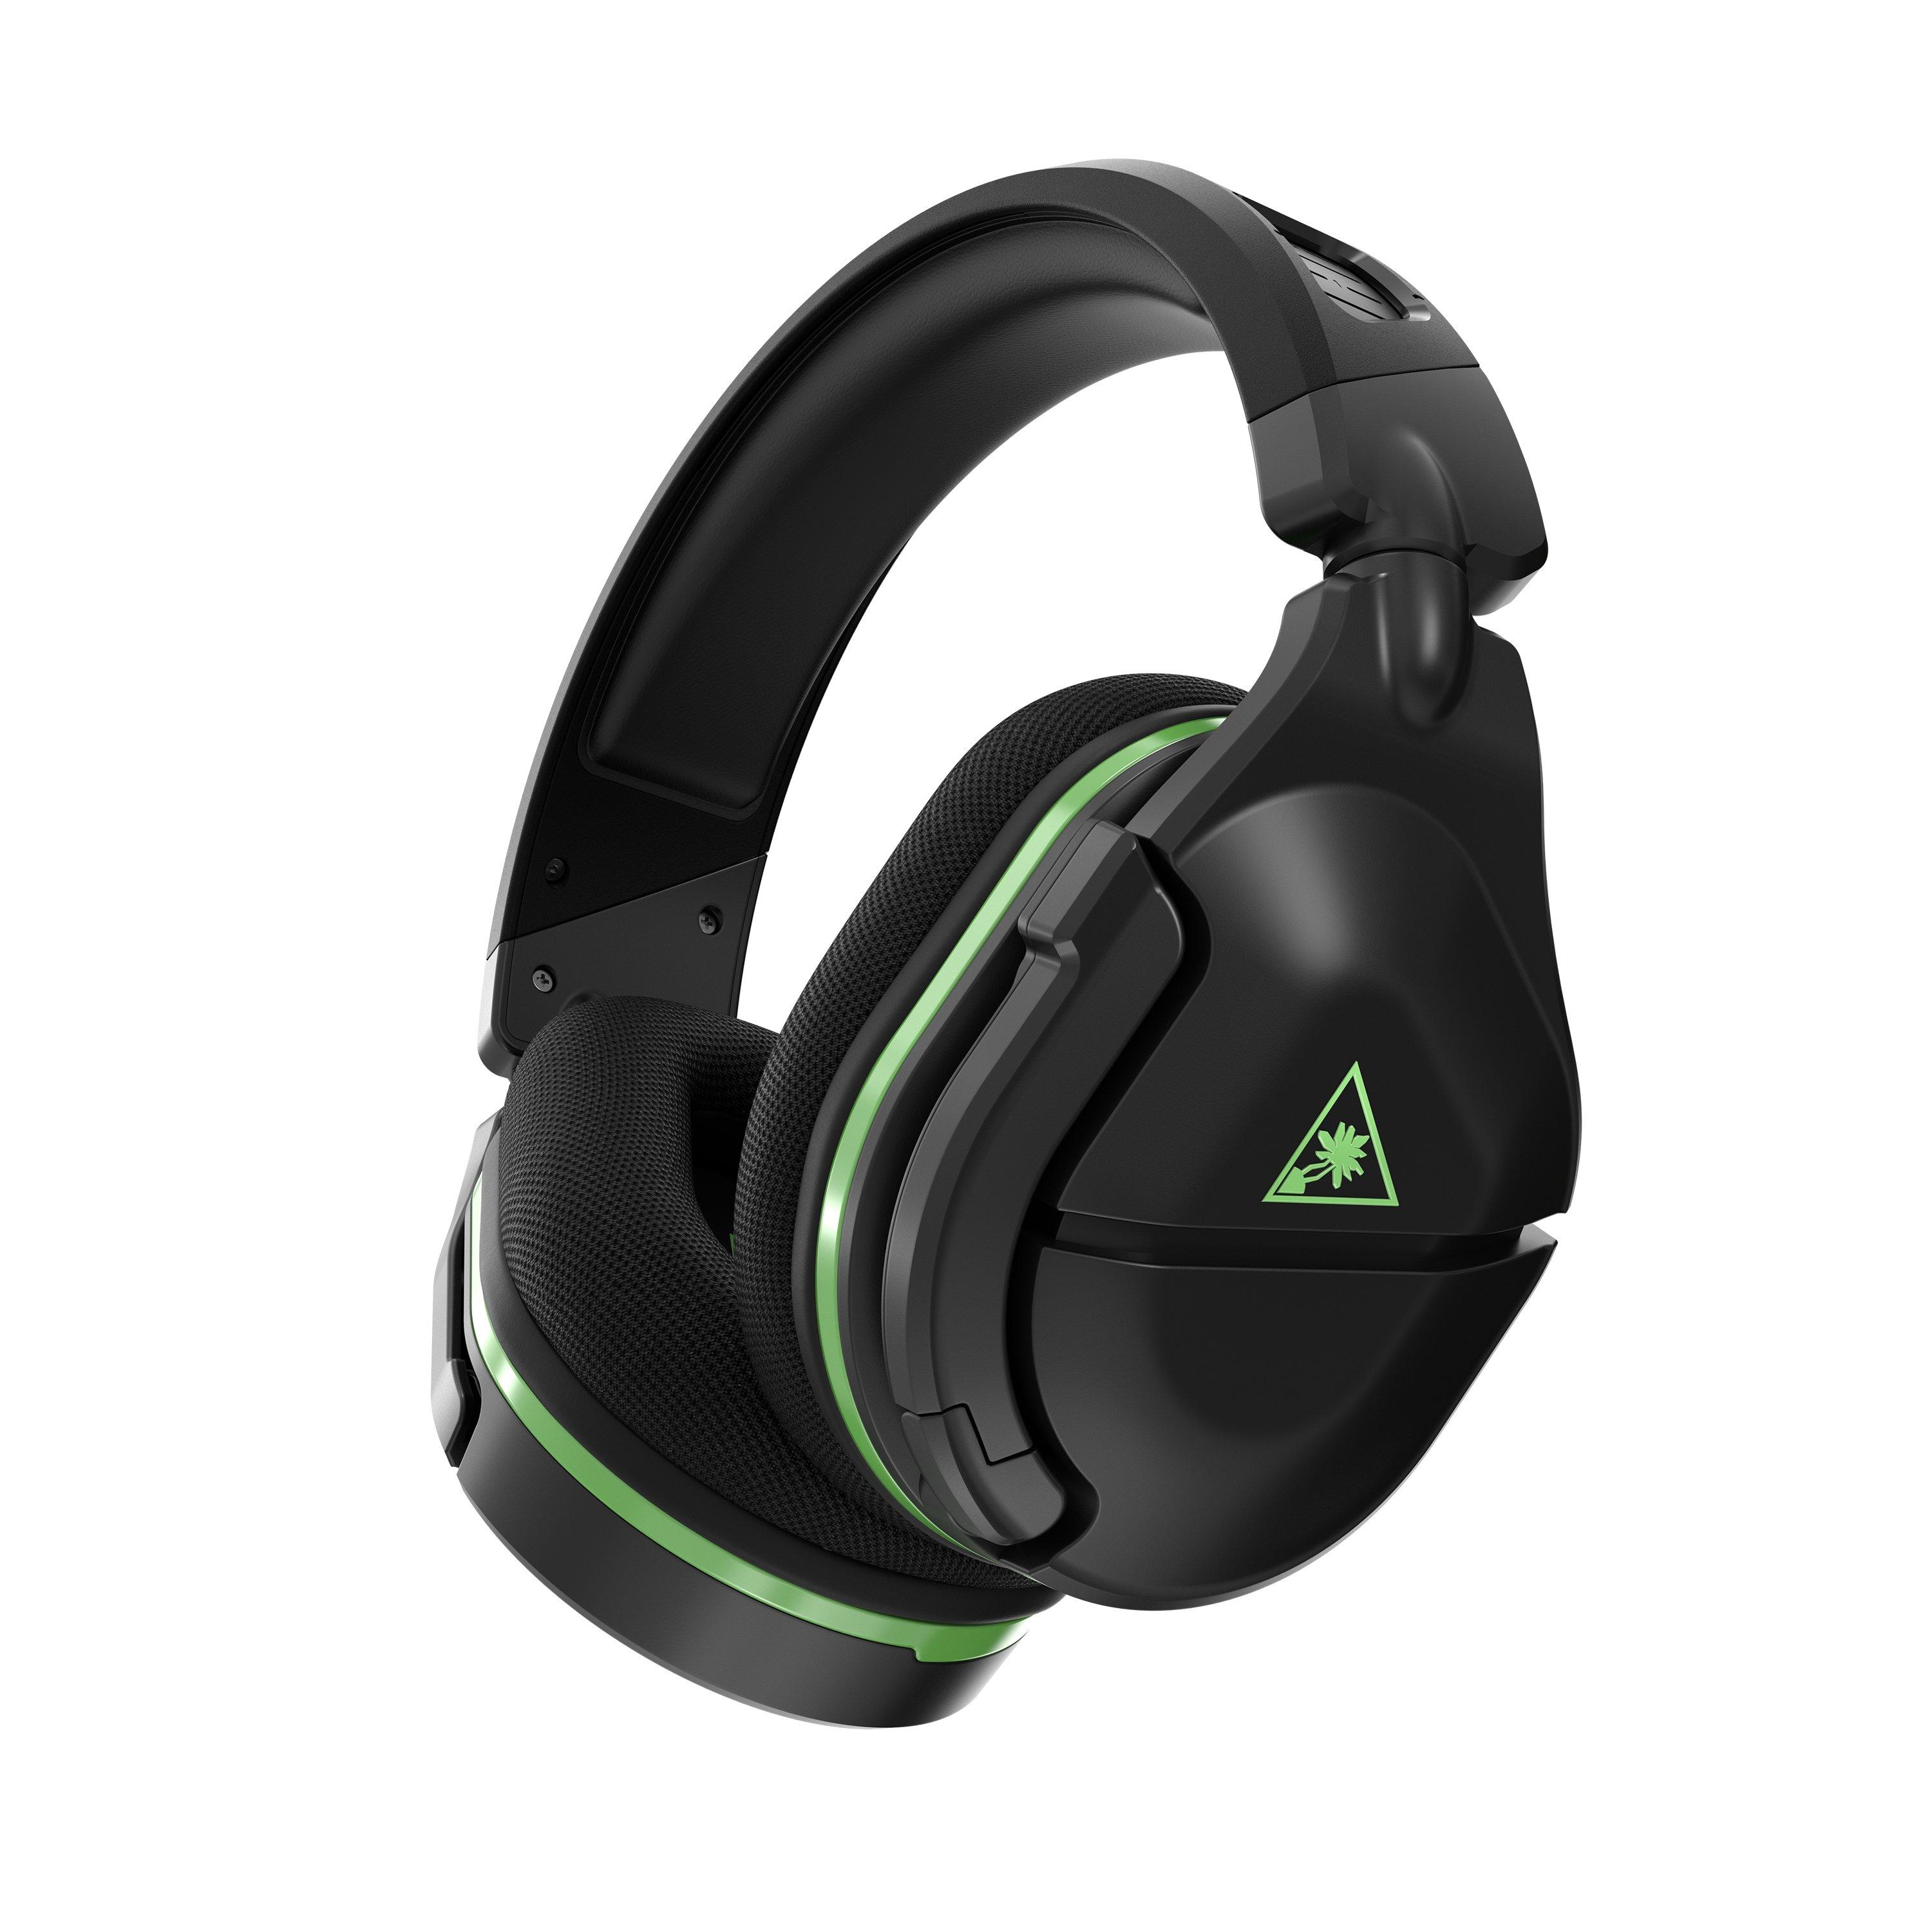 Vernederen Riskant bijl Turtle Beach Stealth 600 Gen 2 USB Wireless Gaming Headset for Xbox Series  X/S and Xbox One | GameStop